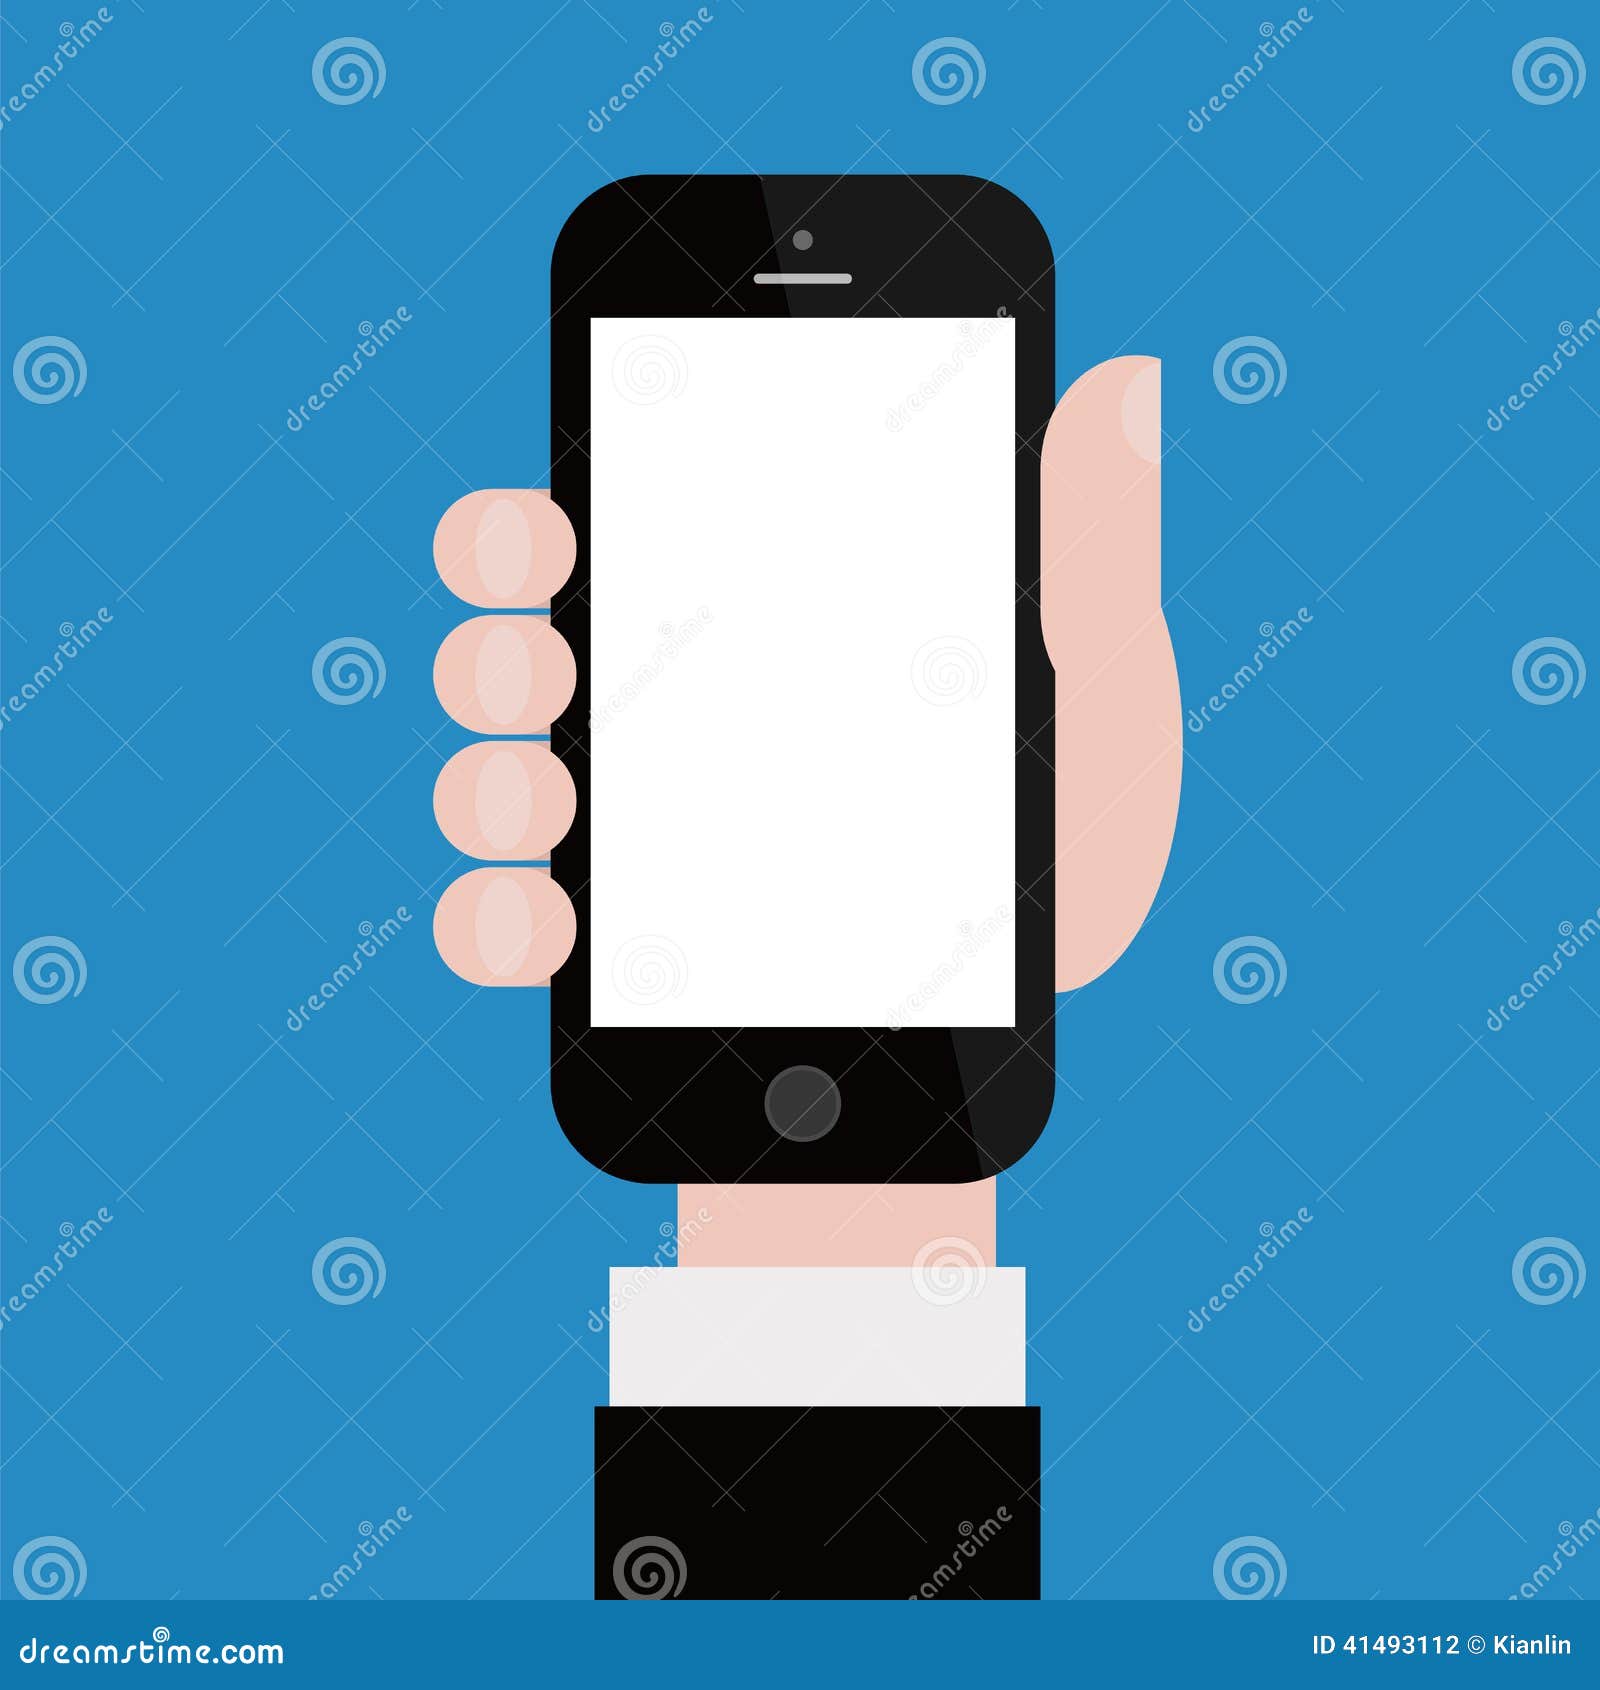 holding up smartphone